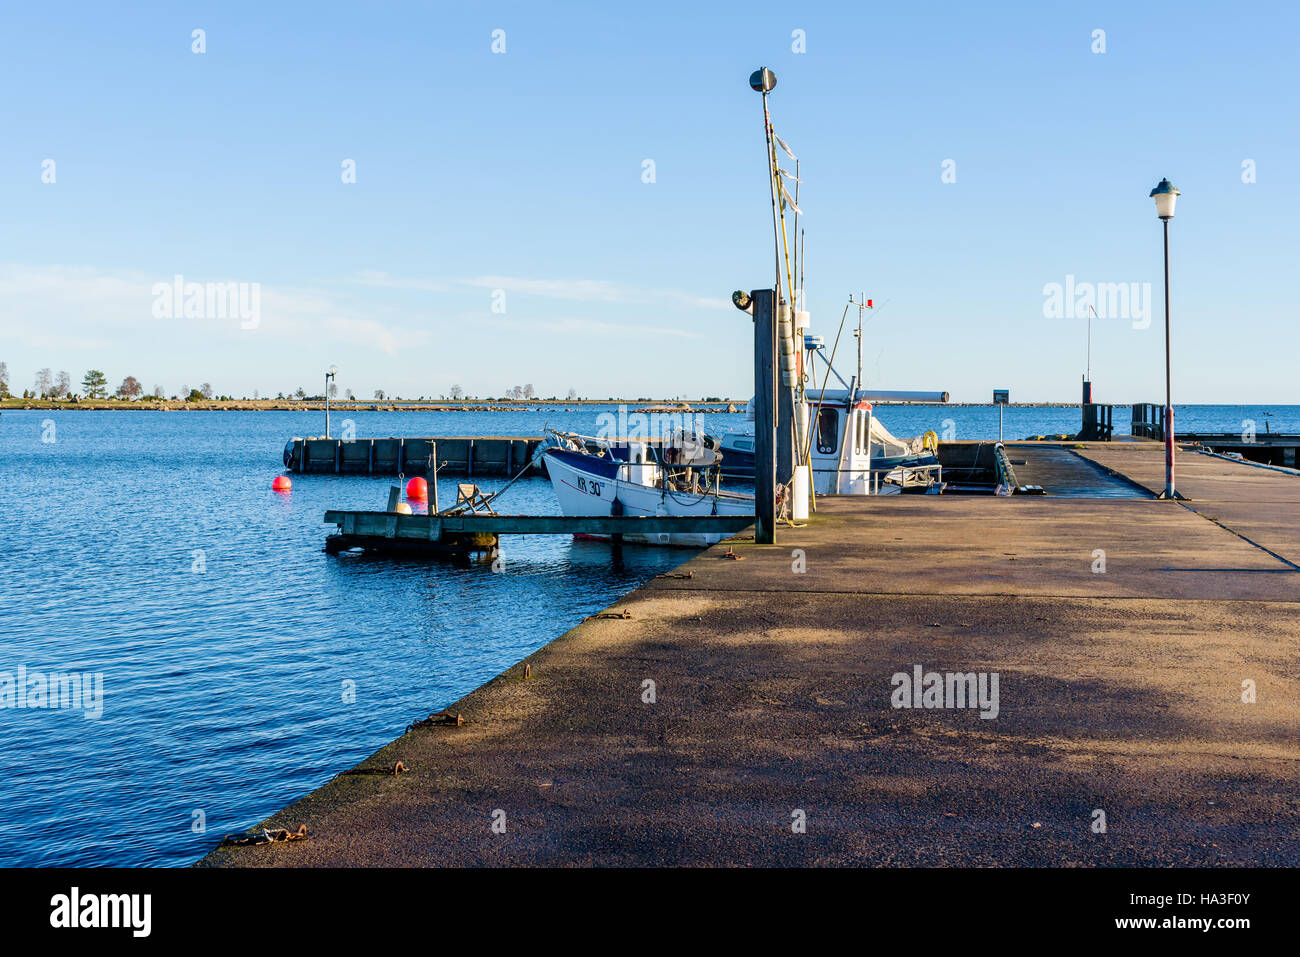 Kristianopel, Sweden - November 24, 2016: Documentary of public access harbor area. Calm day in fall with fishing boat moored dockside. Stock Photo